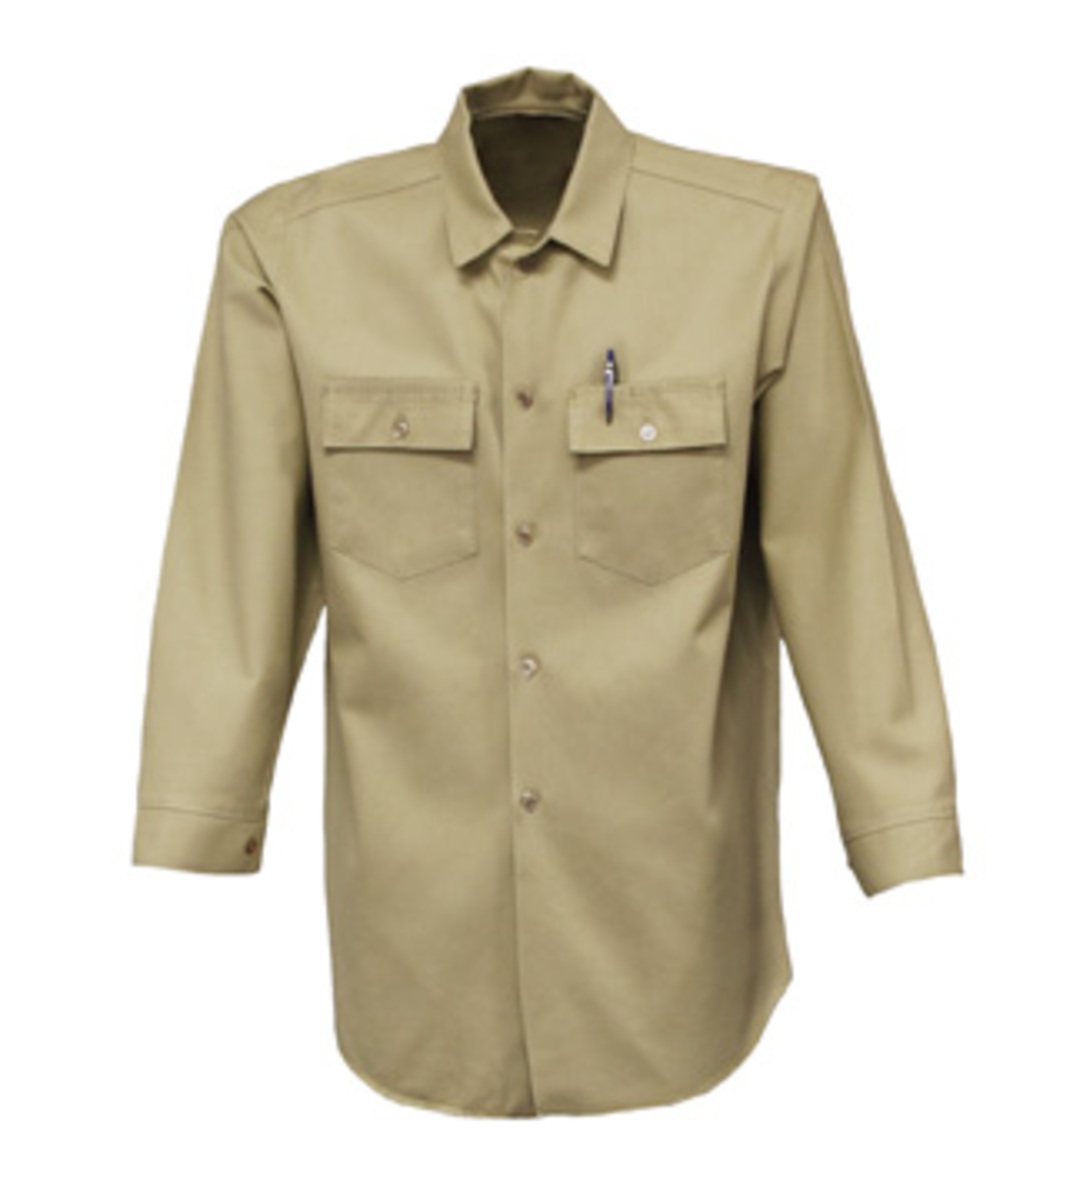 Stanco Safety Products™ Large Tan Indura® UltraSoft® Arc Rated Flame Resistant Shirt With Button Closure